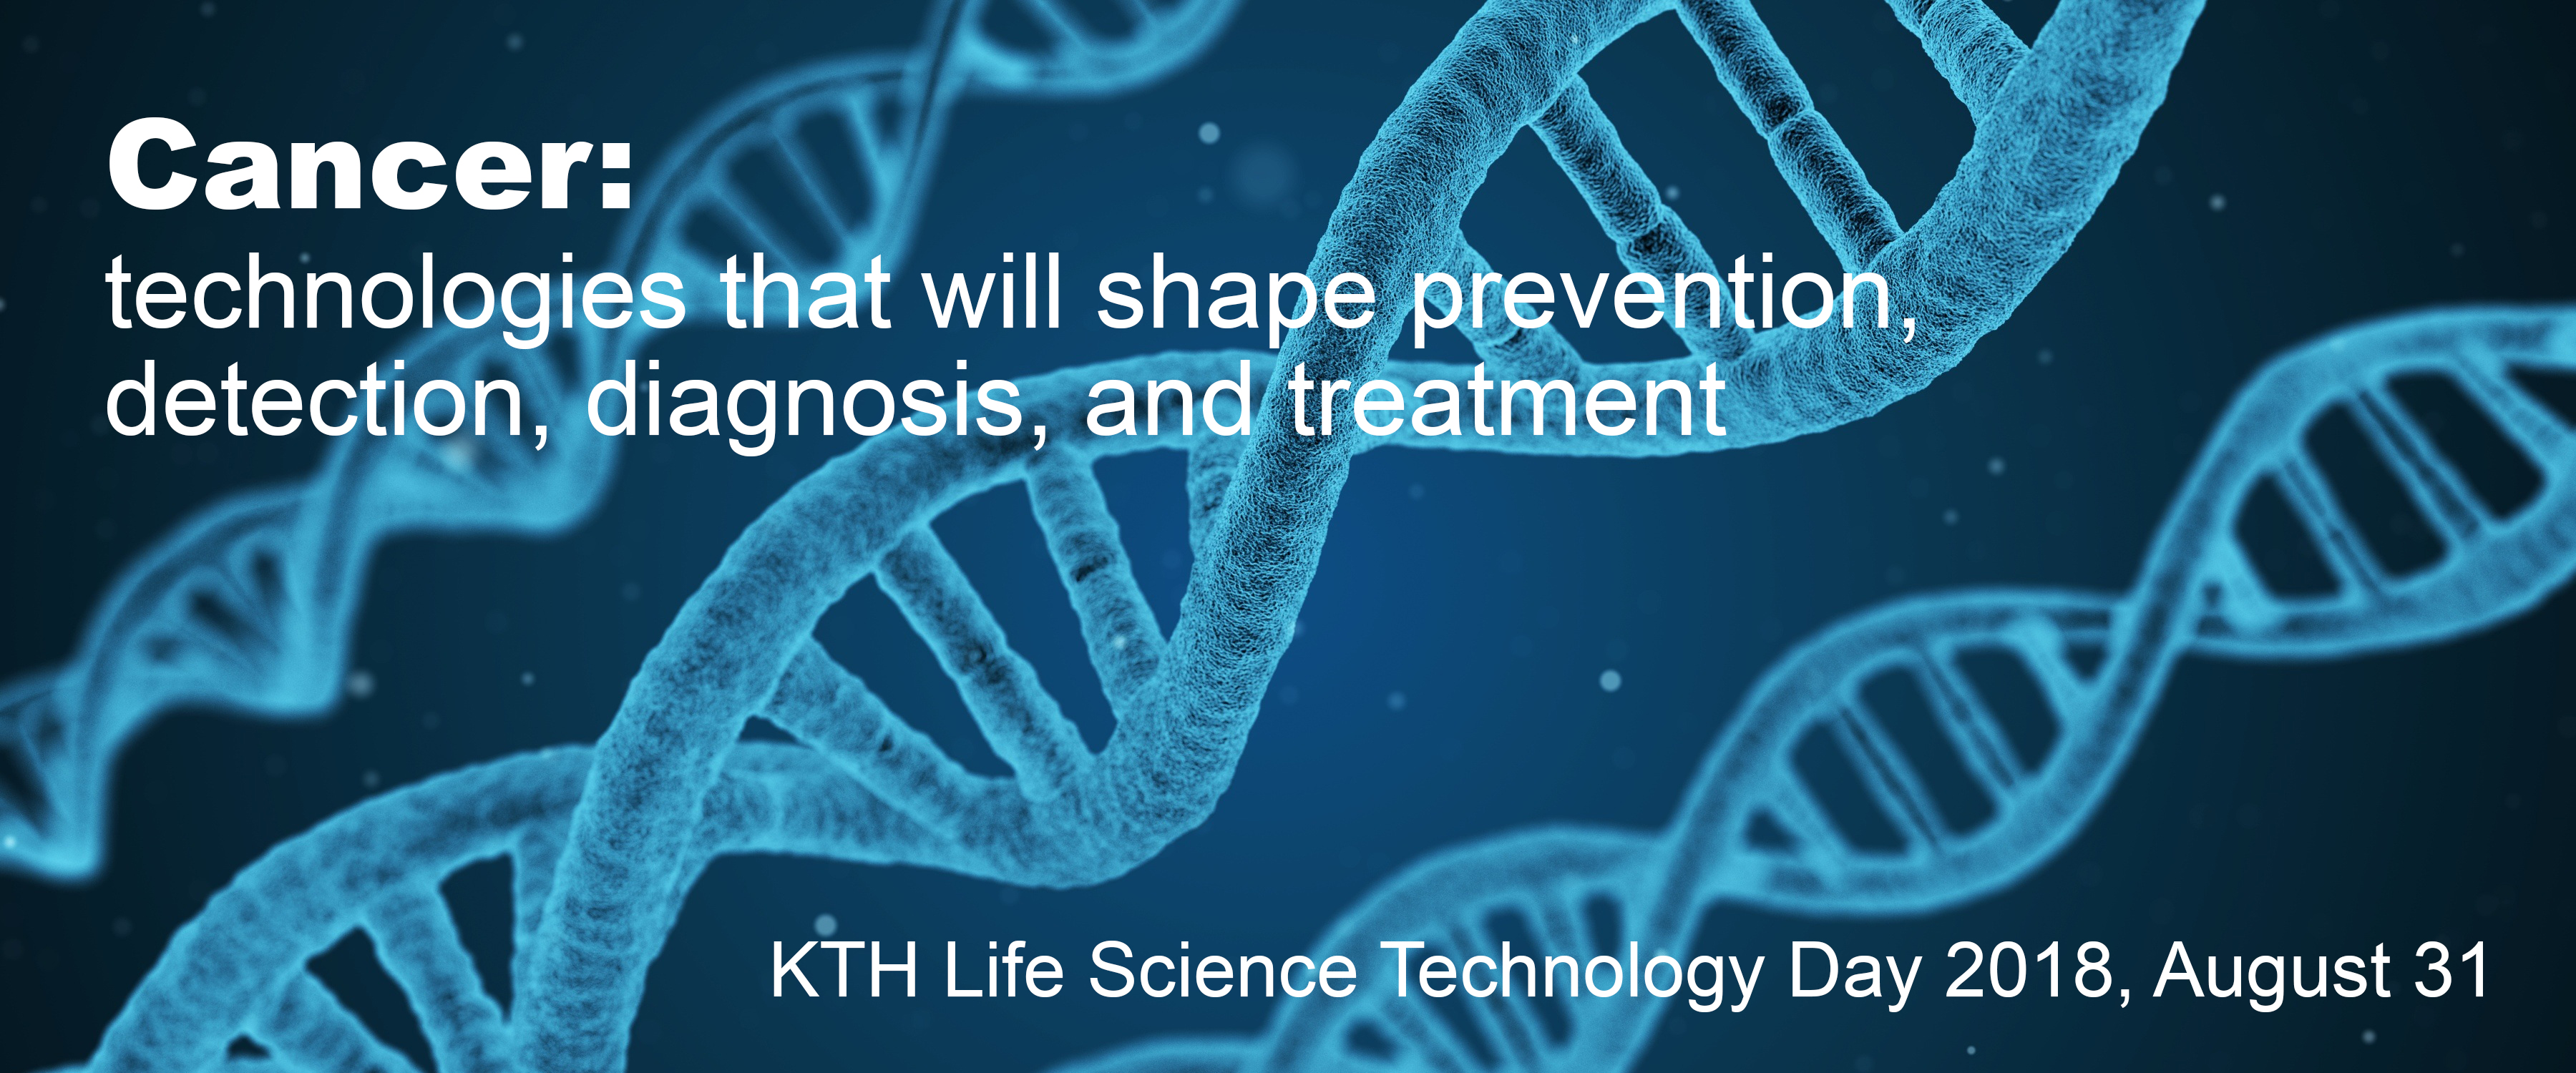 Cancer: Technologies that will shape prevention, detection, diagnosis, and treatment